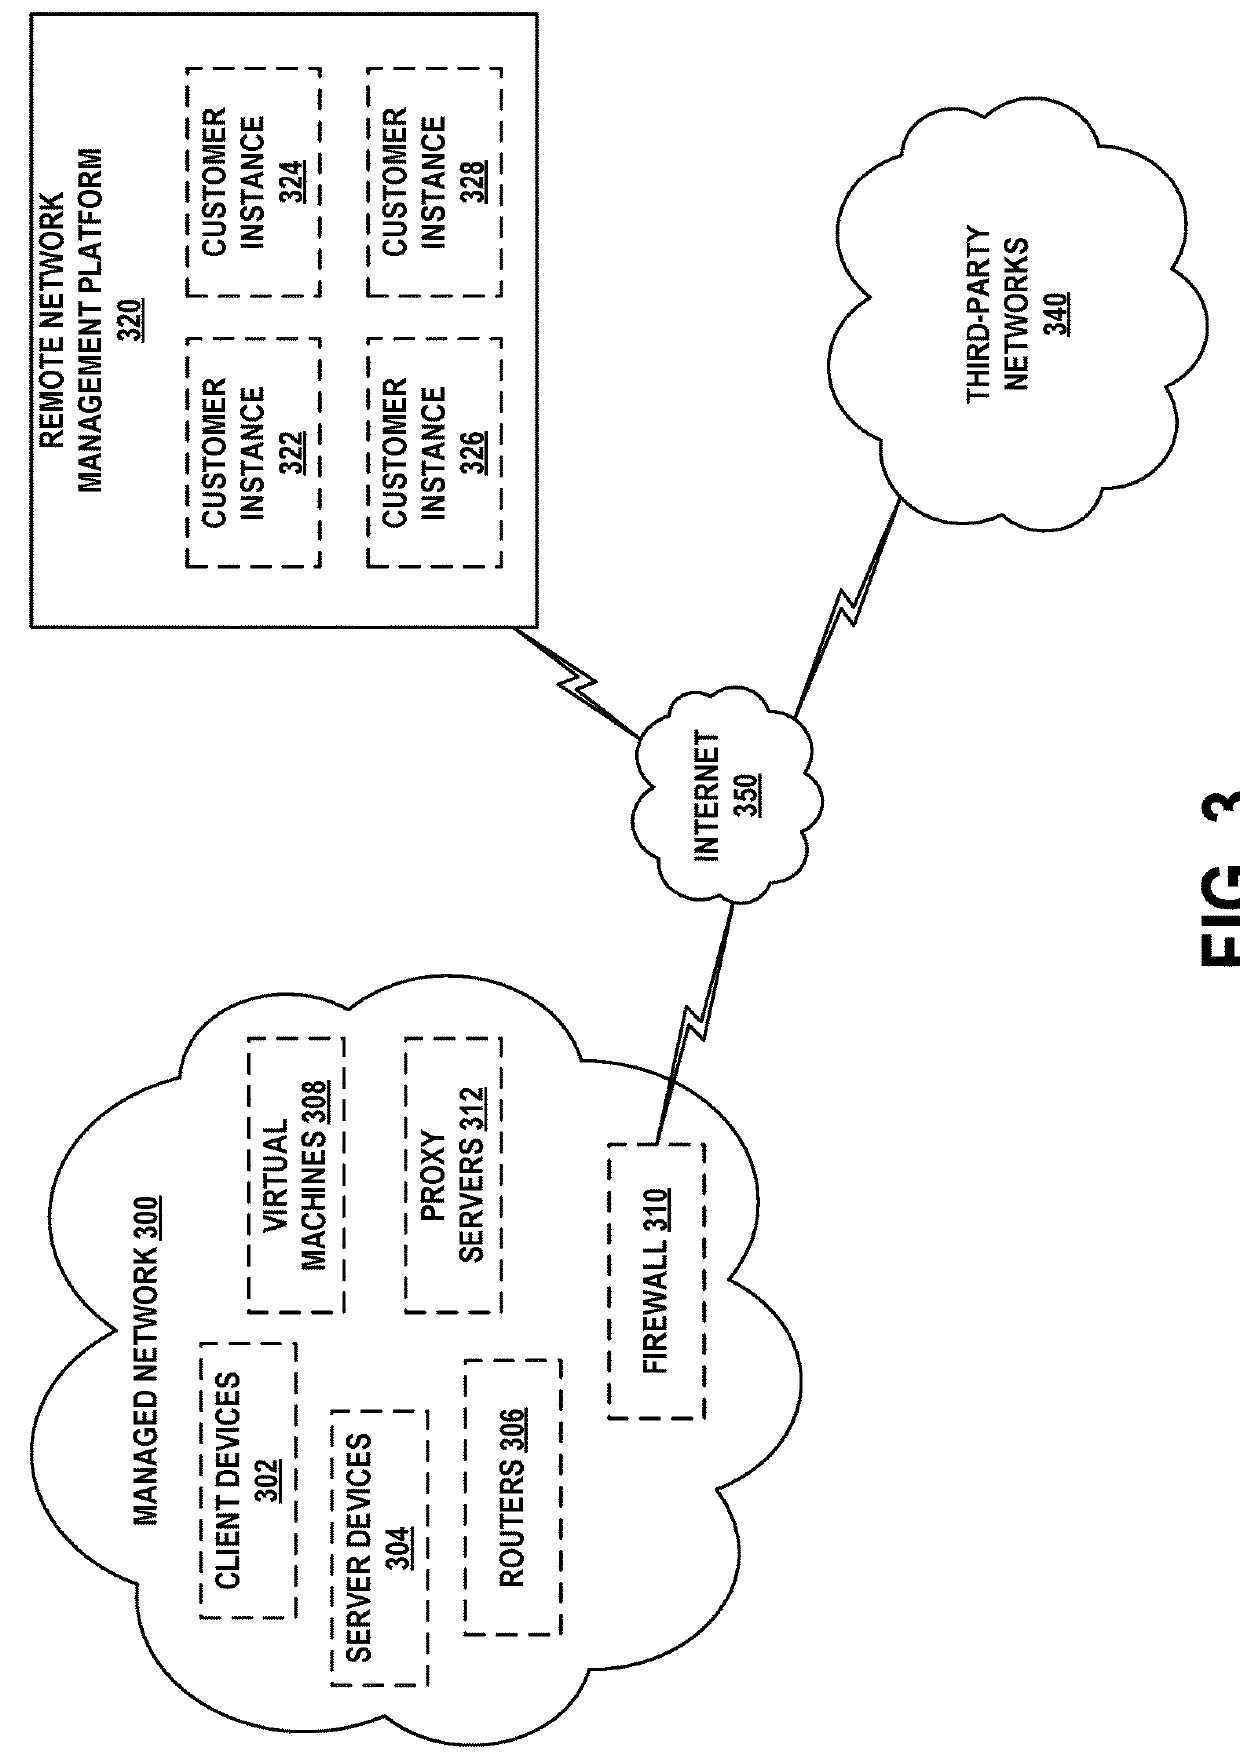 Device and service discovery across multiple network types